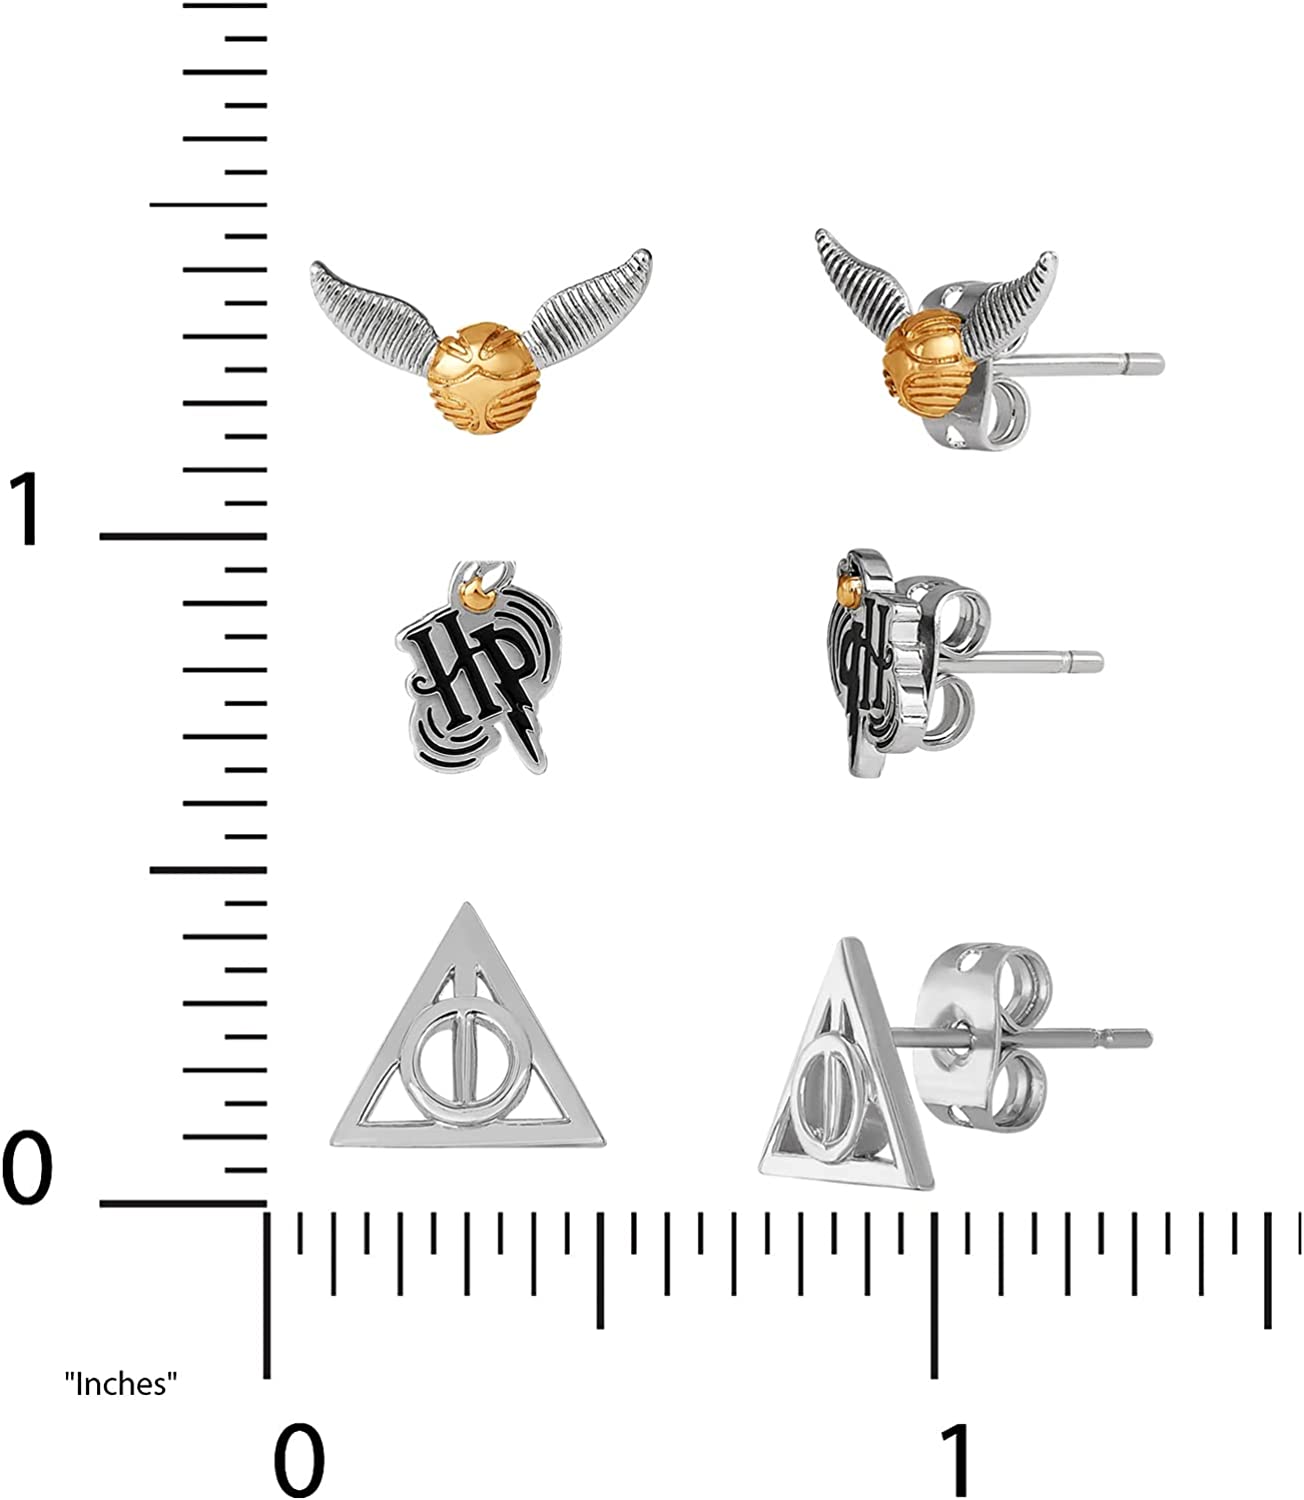 Harry Potter Jewelry, 3 Pair Earrings Sets, Gold Plated, Silver Plated Studs - Harry Potter Glasses, Deathly Hallows, and Lighting Scar; HP, Deathly Hallows, and Golden Snitch